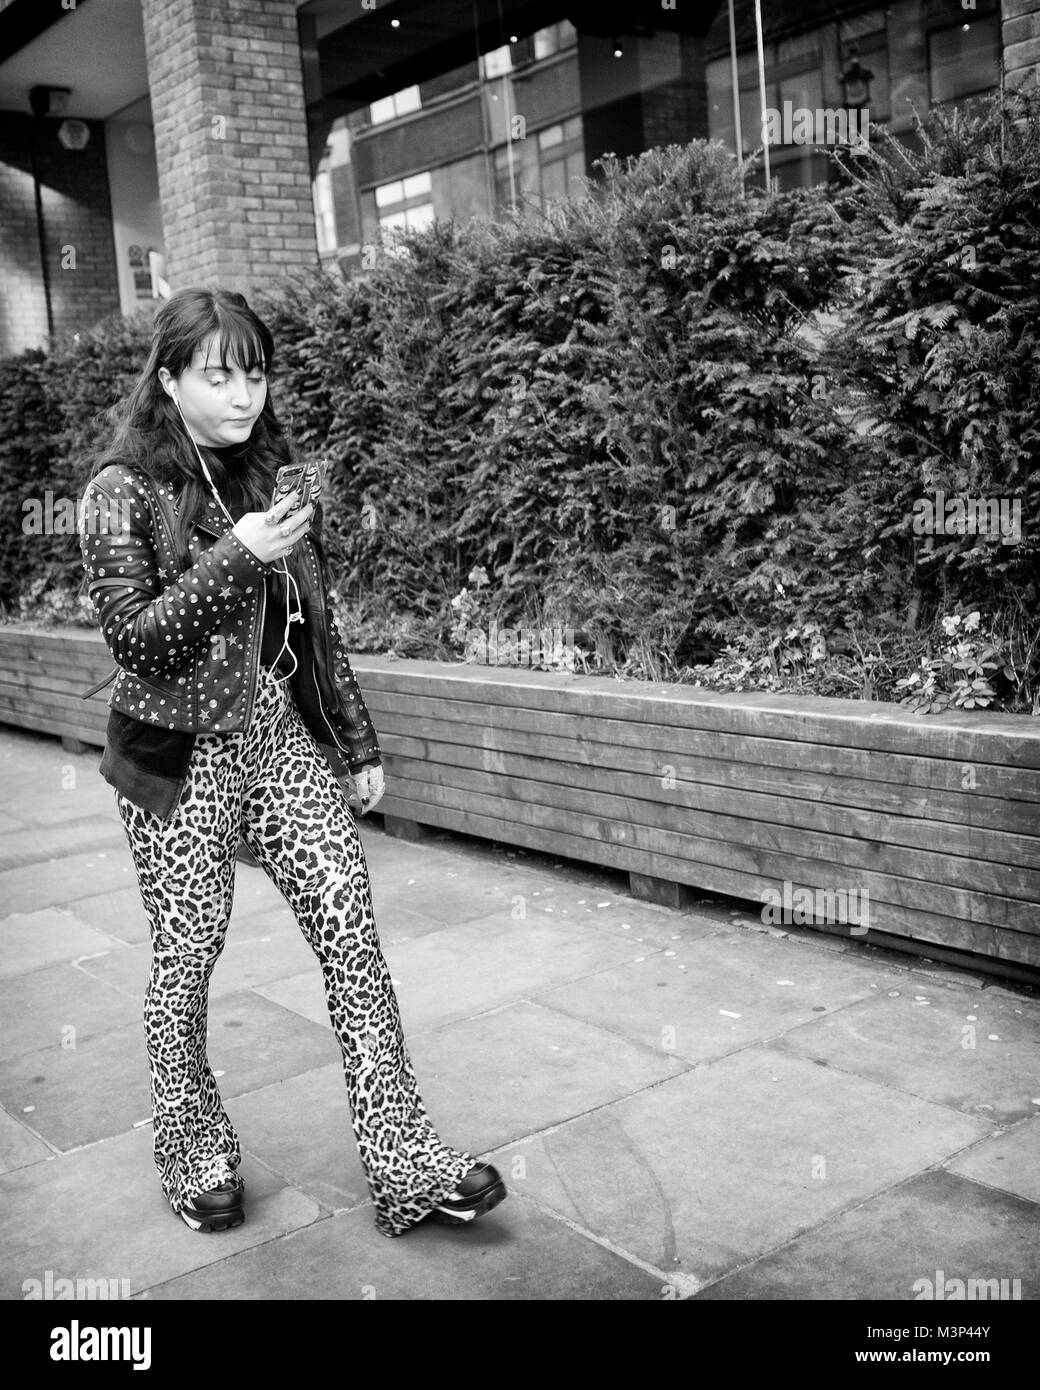 Leopard skin woman Black and White Stock Photos & Images - Alamy